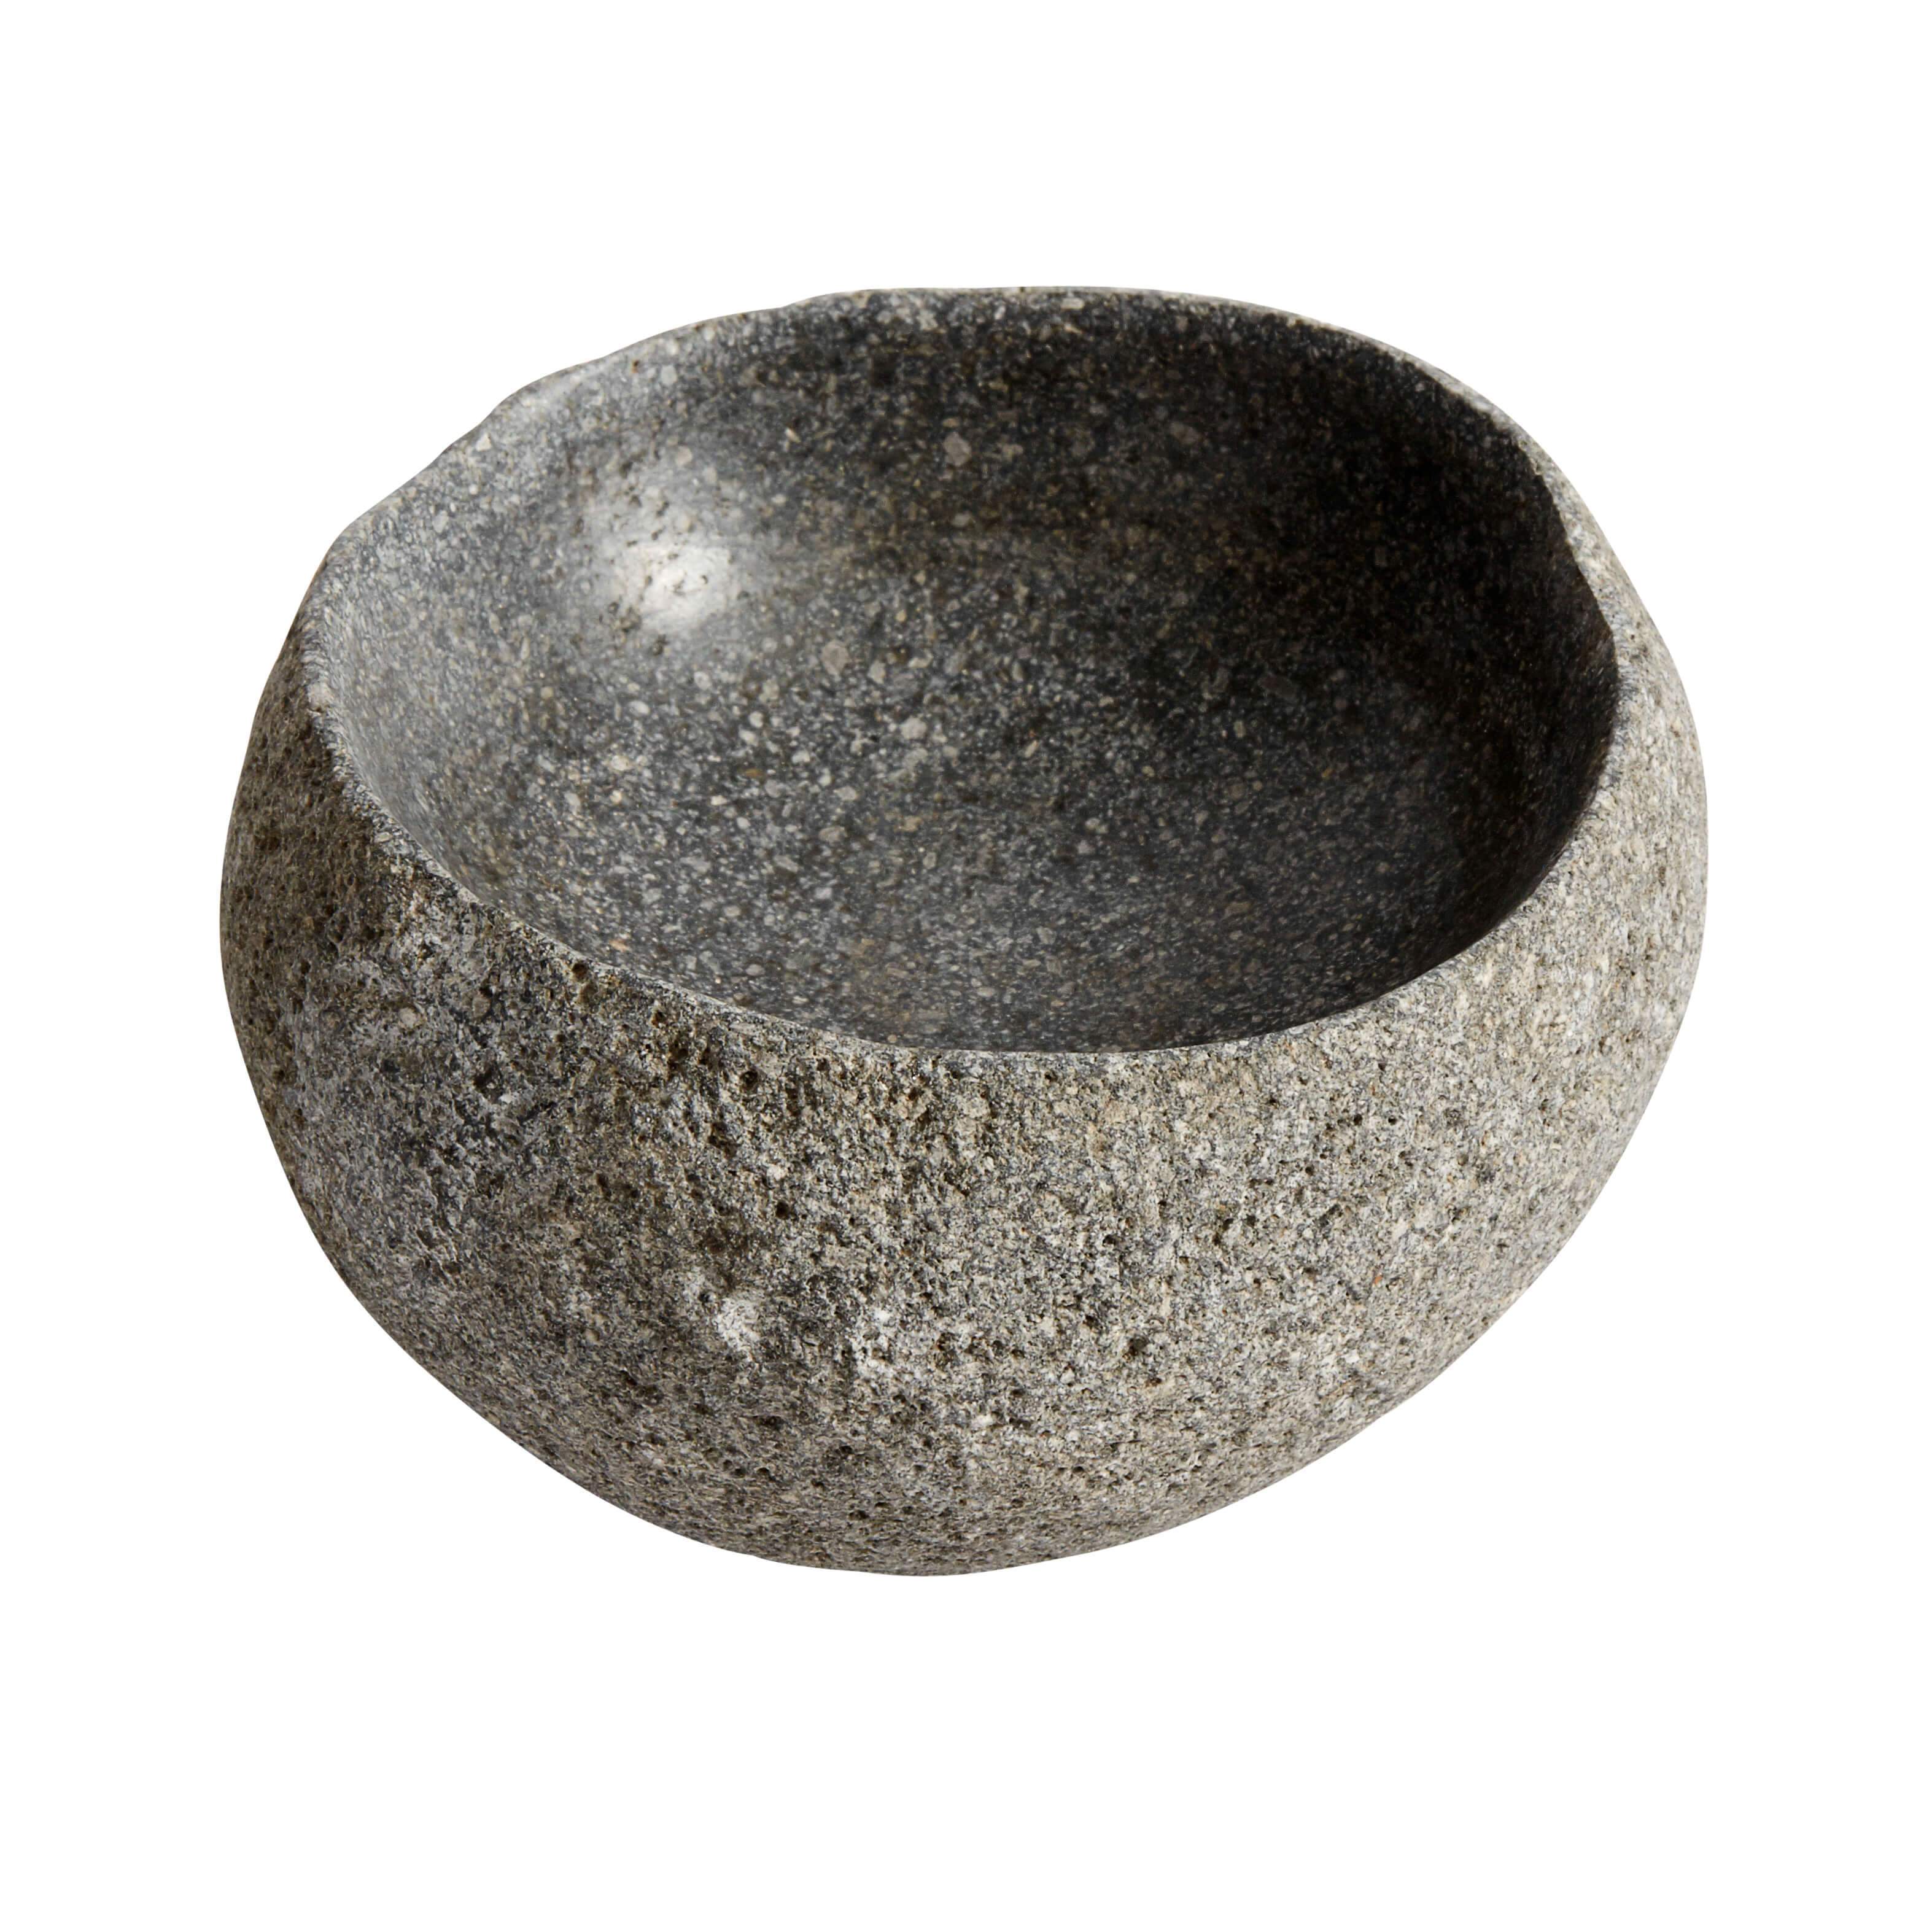 MUUBS Valley Bowl Riverstone, 10 cm